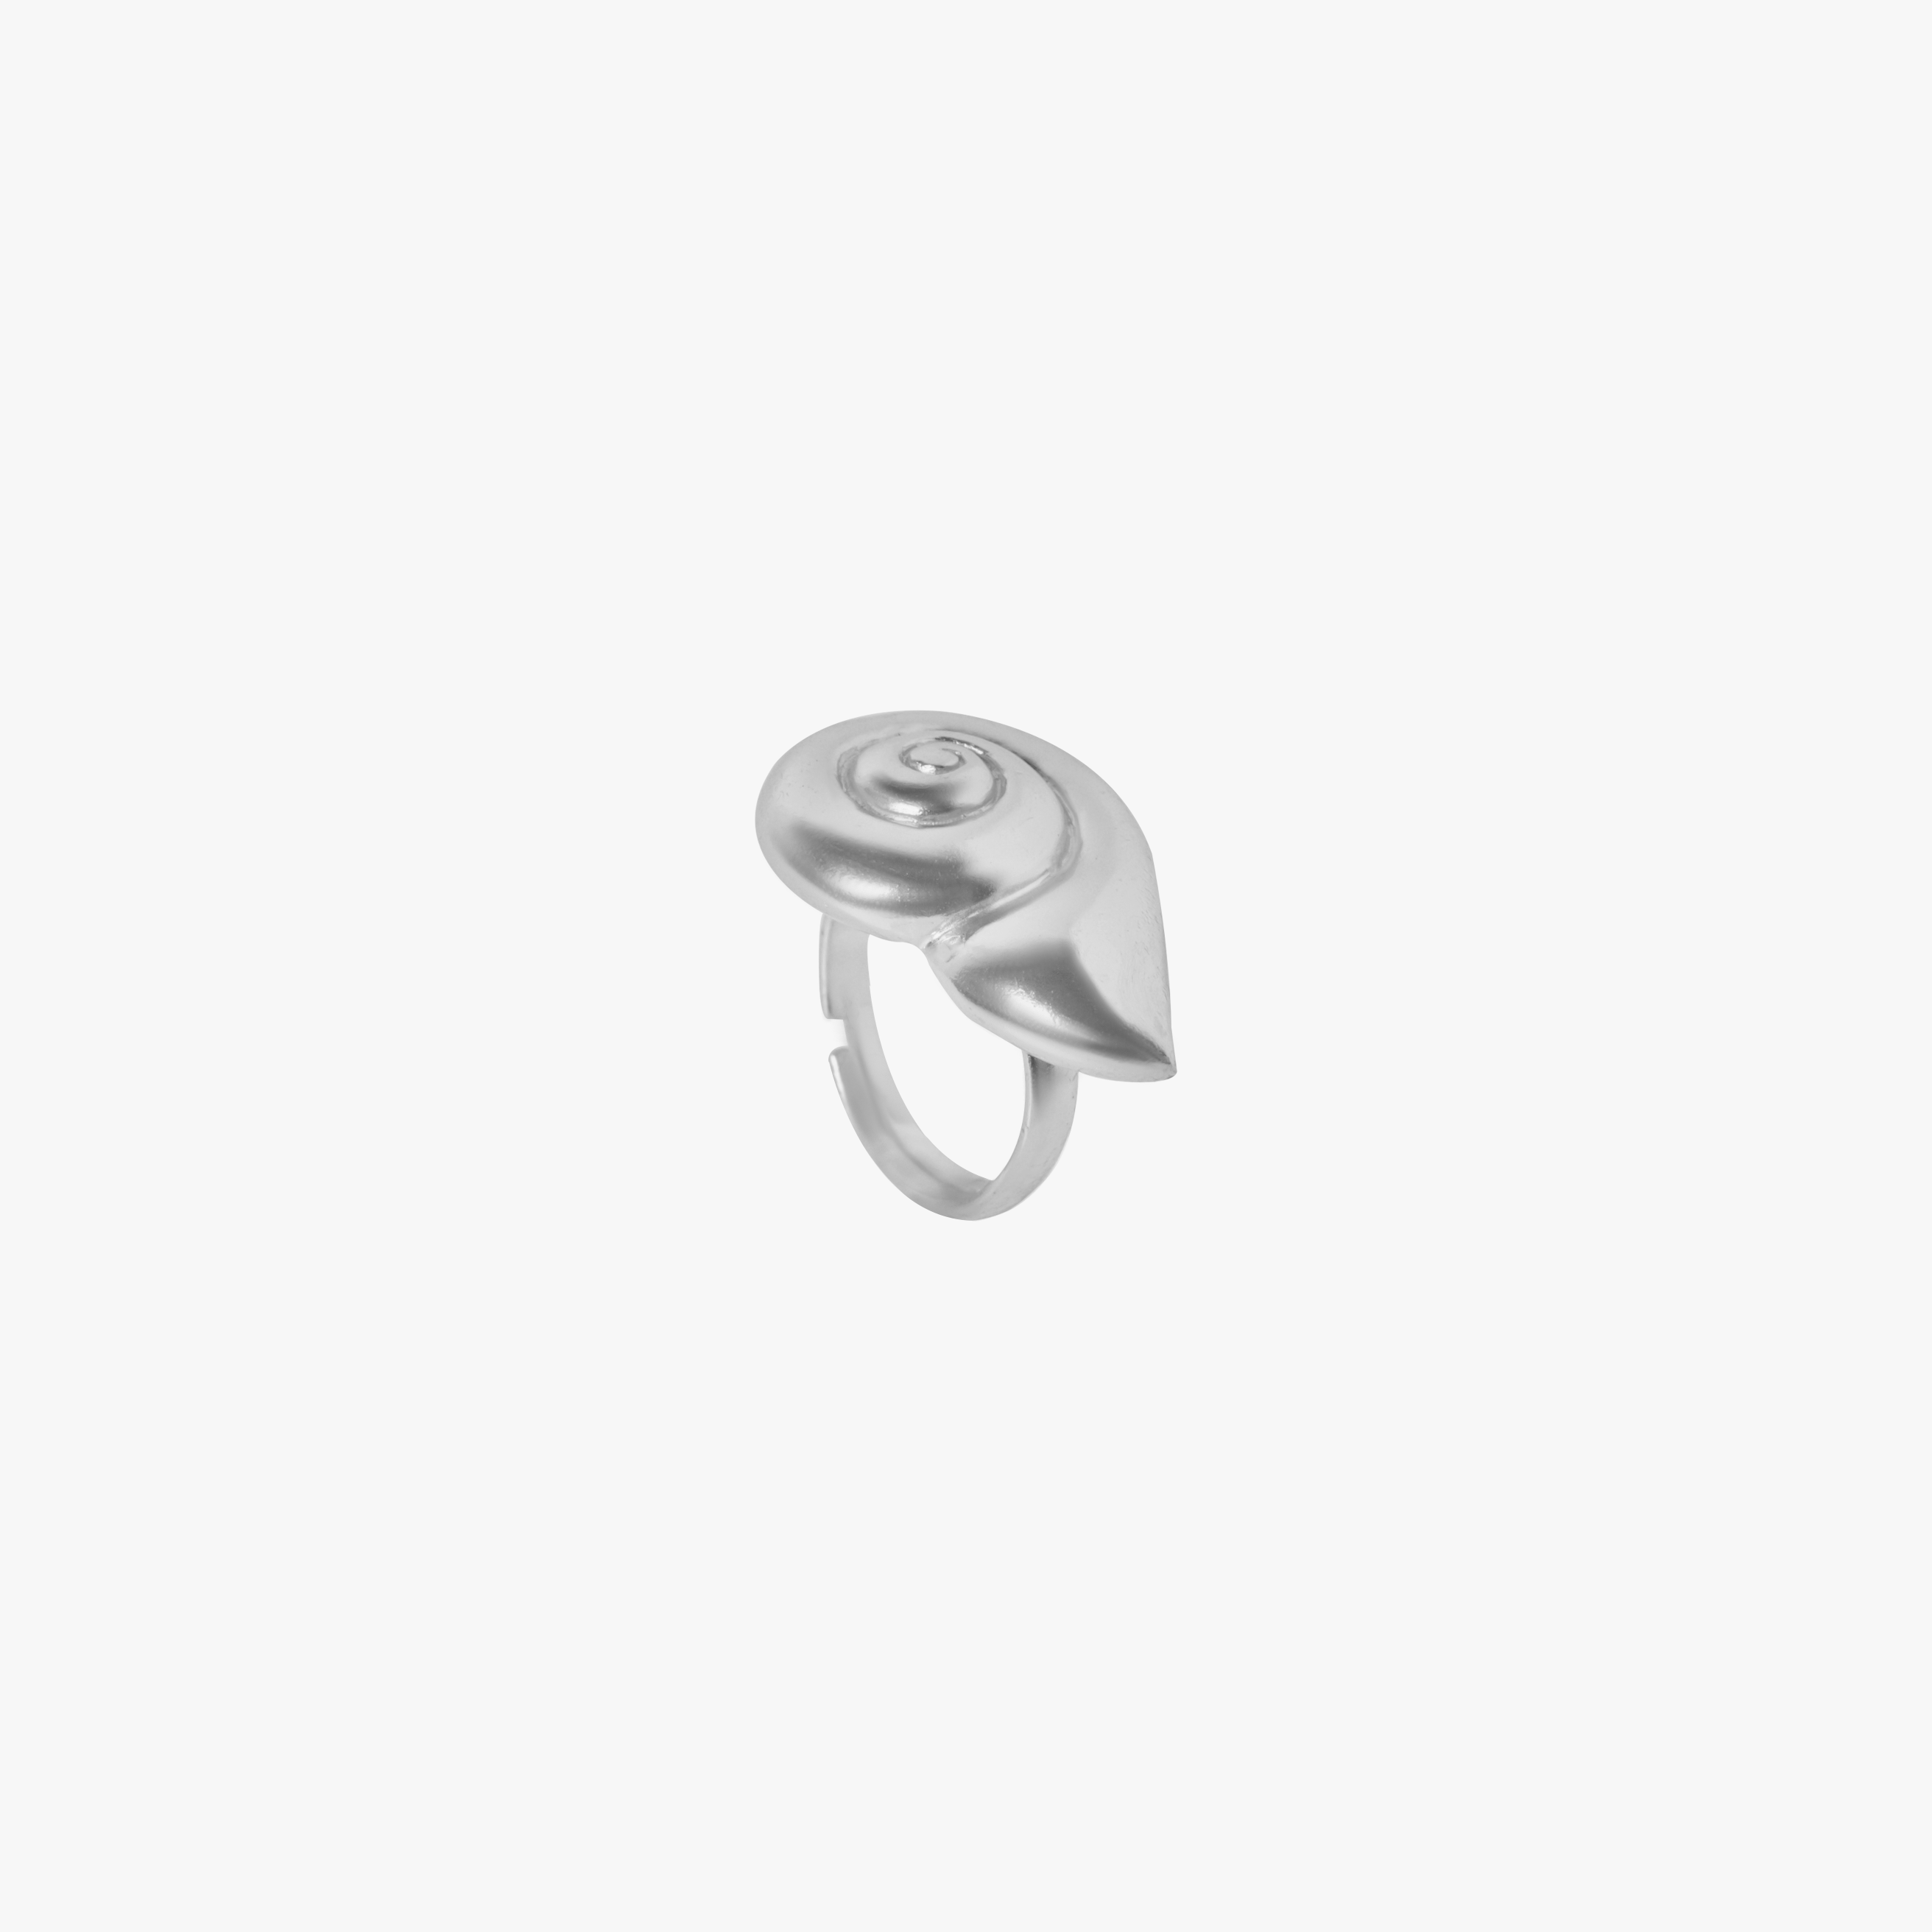 MOON SNAIL  RING SILVER TONE , a product by Equiivalence